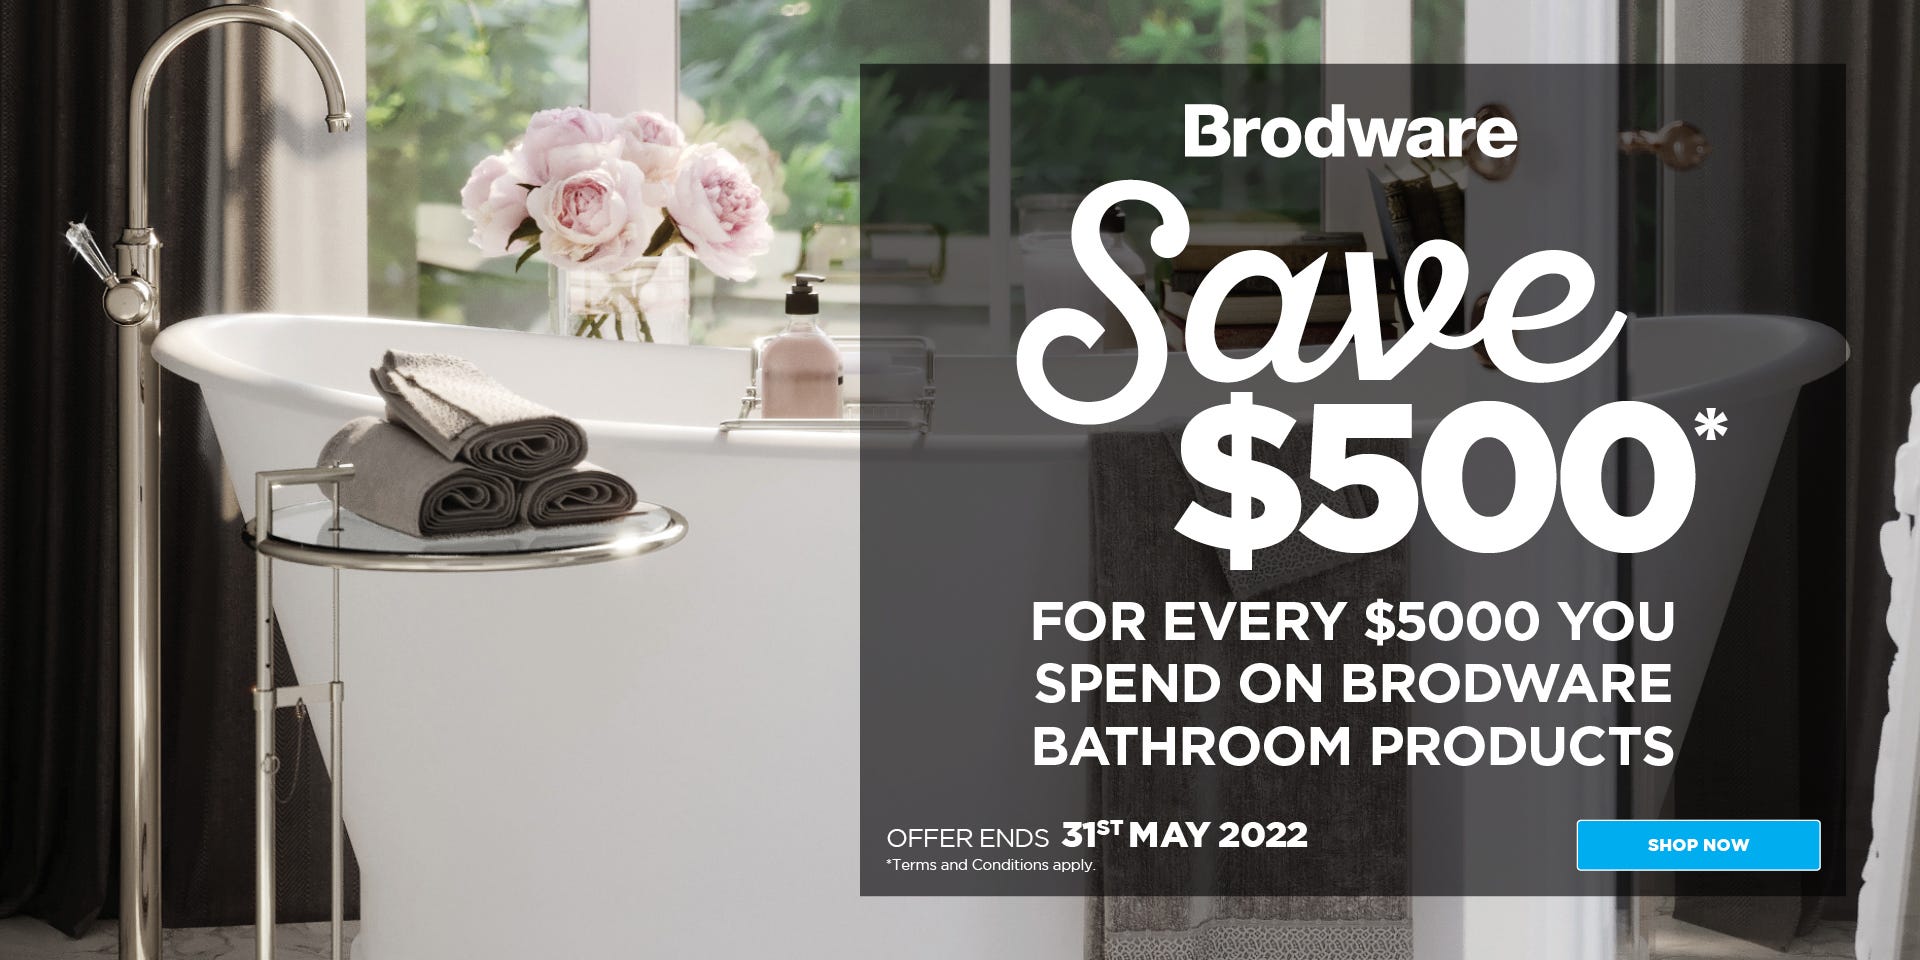 Save $500* for every $5000 you spend on Brodware bathroom products at e&s. Offer ends 31/05/22. Find out more at an e&s near you today.